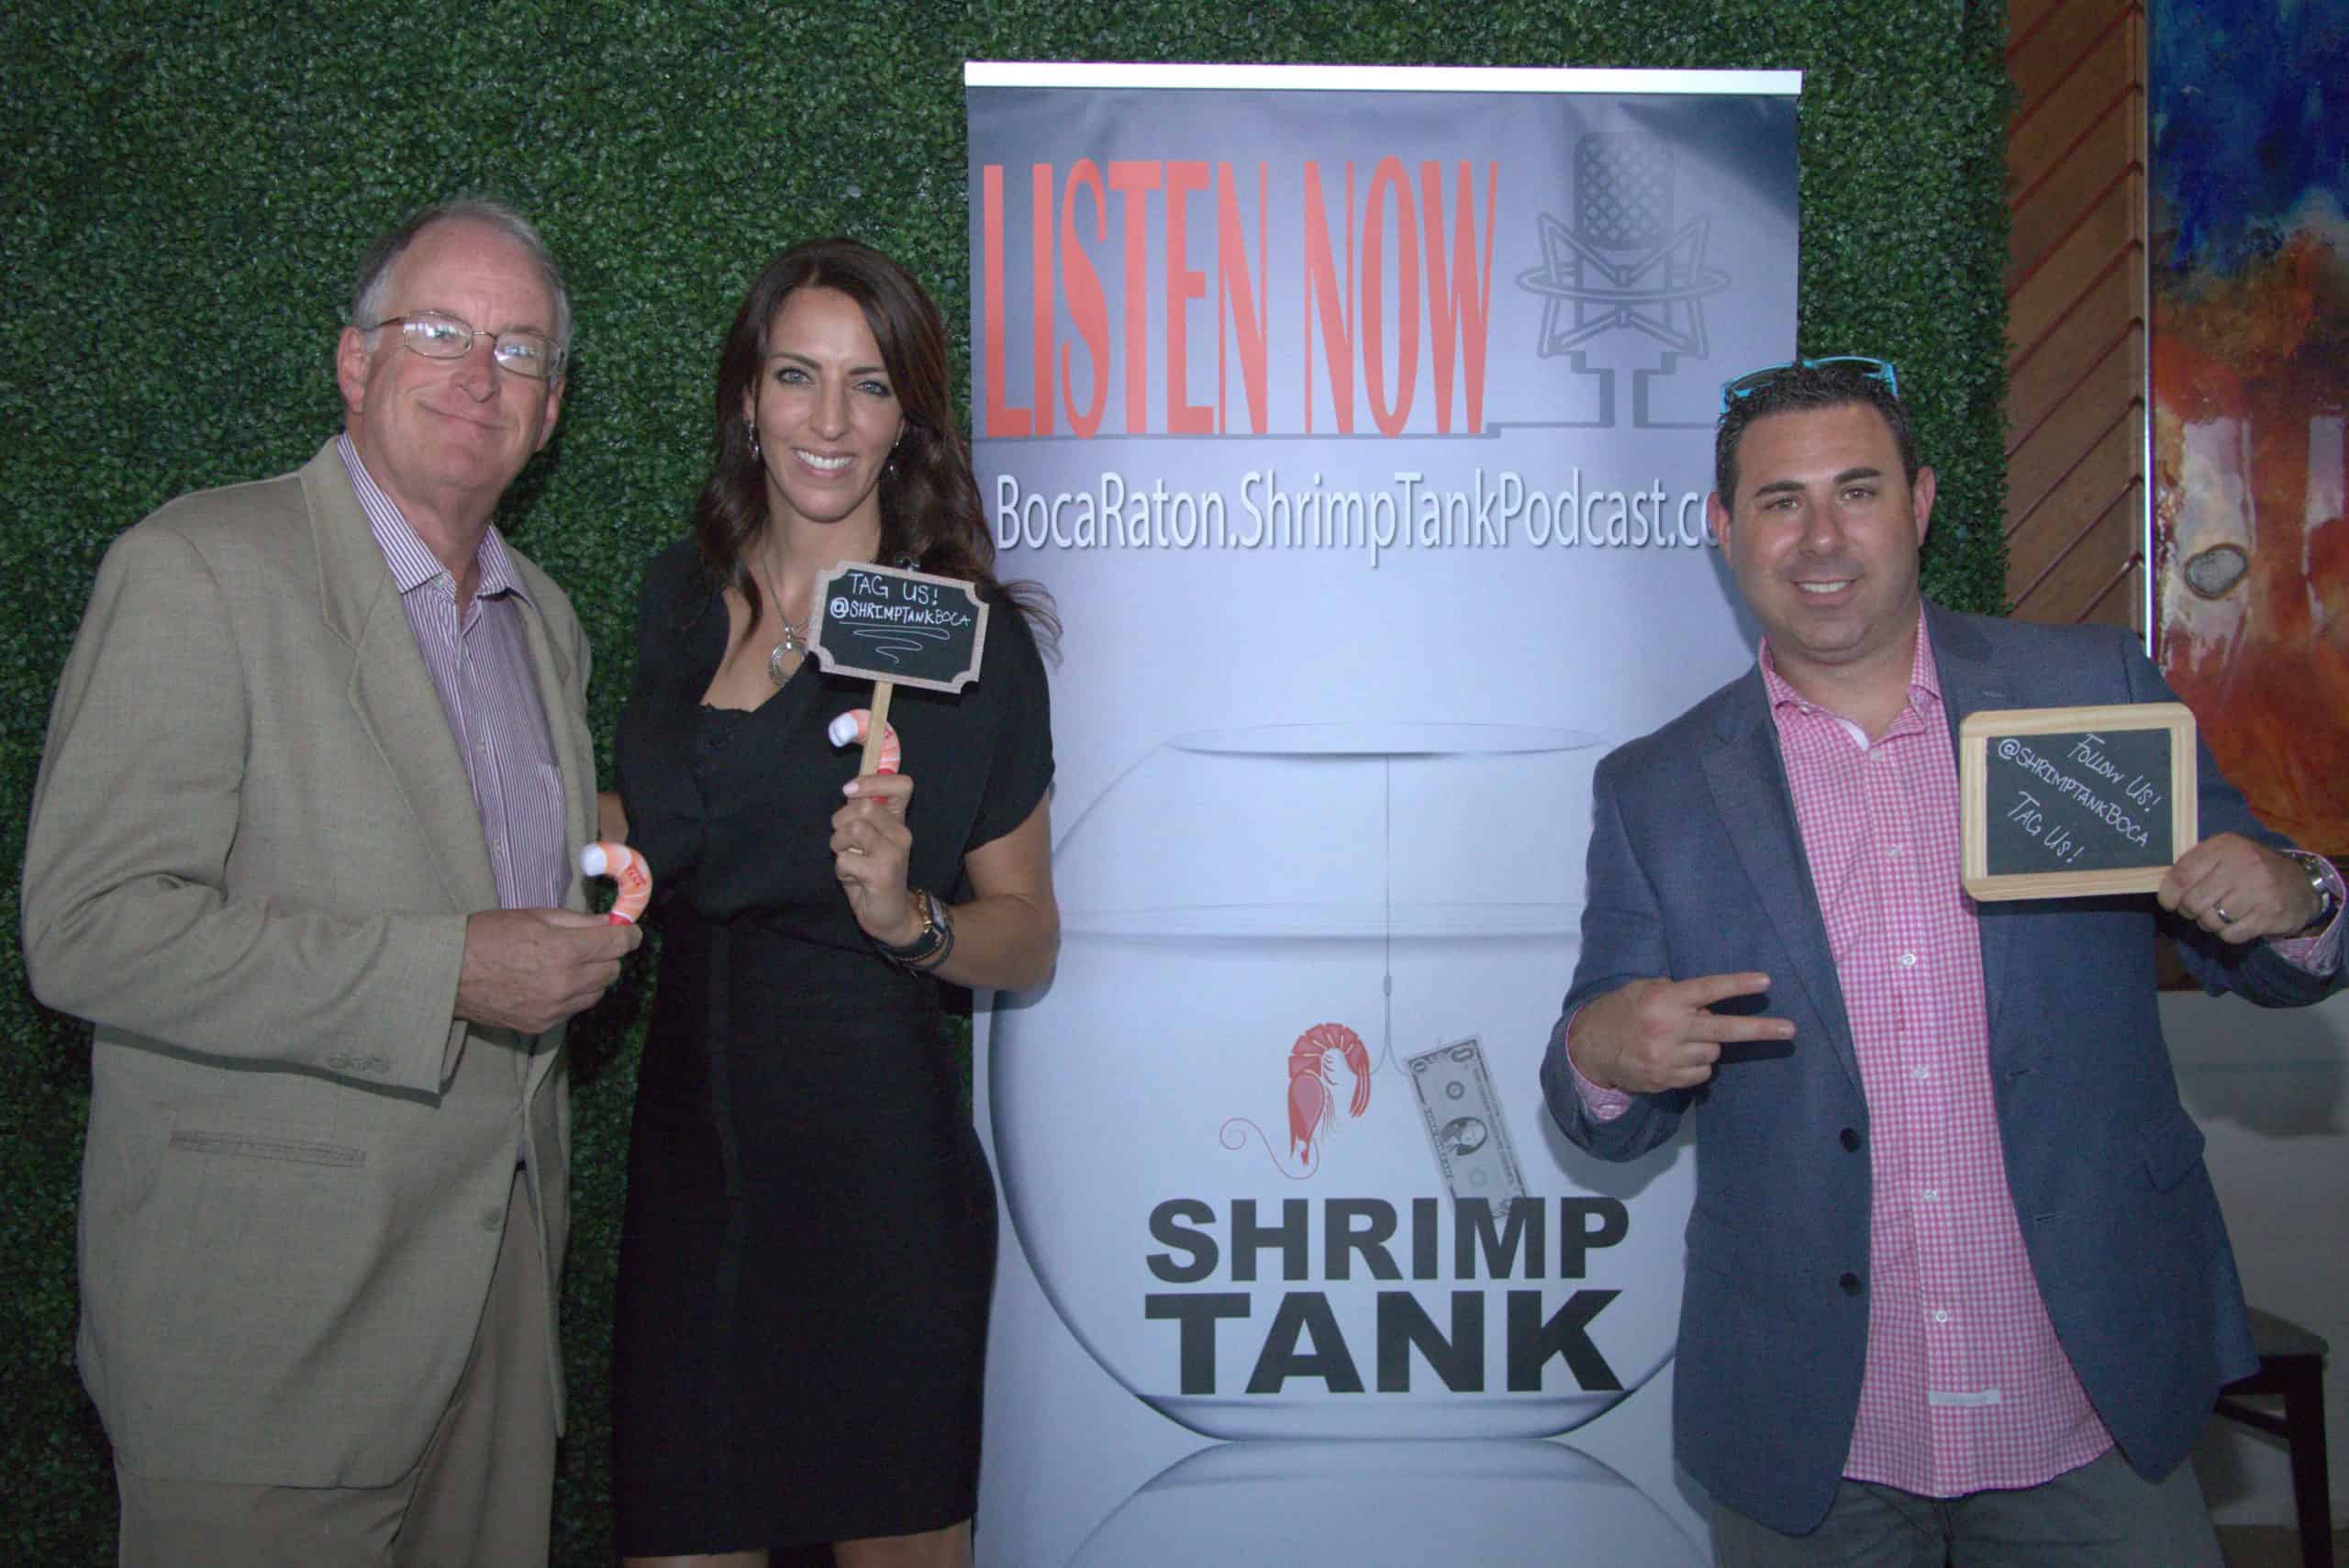 Best things to do in Boca Raton Florida - Jason Hill and The Shrimp Tank podcast